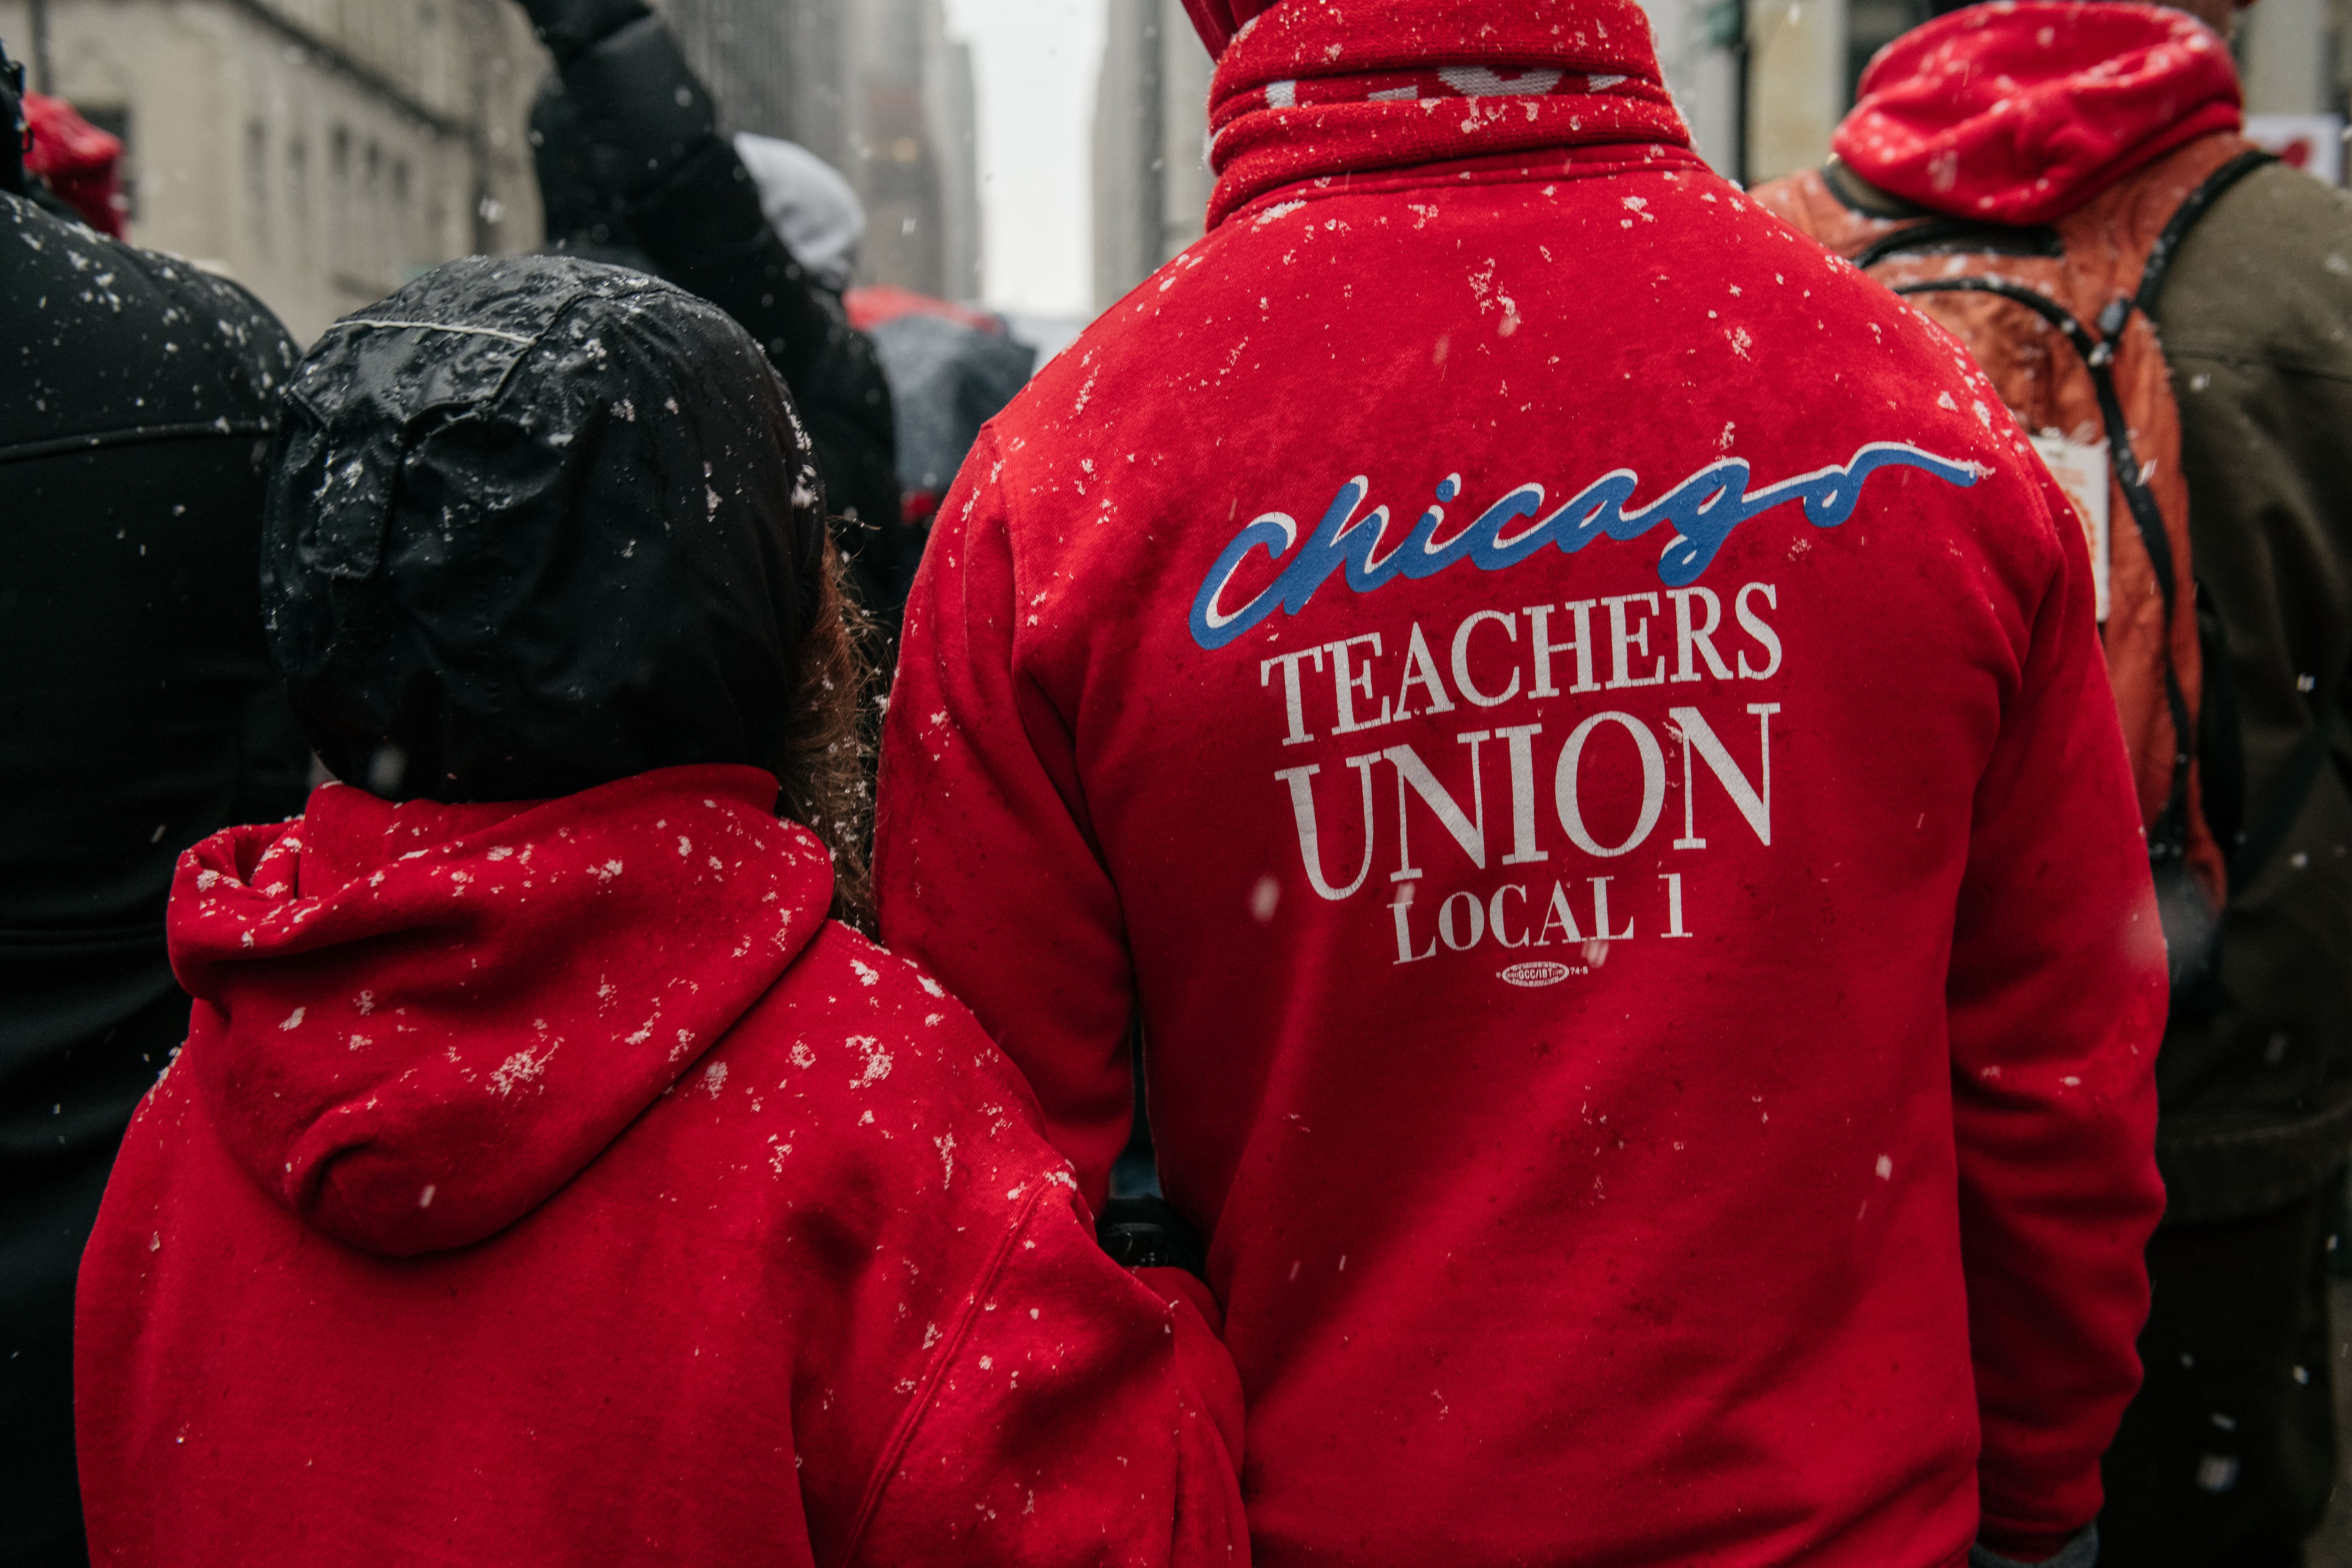 Chicago Teachers Union members stand with their backs to the camera, wearing red jackets with the union’s name.